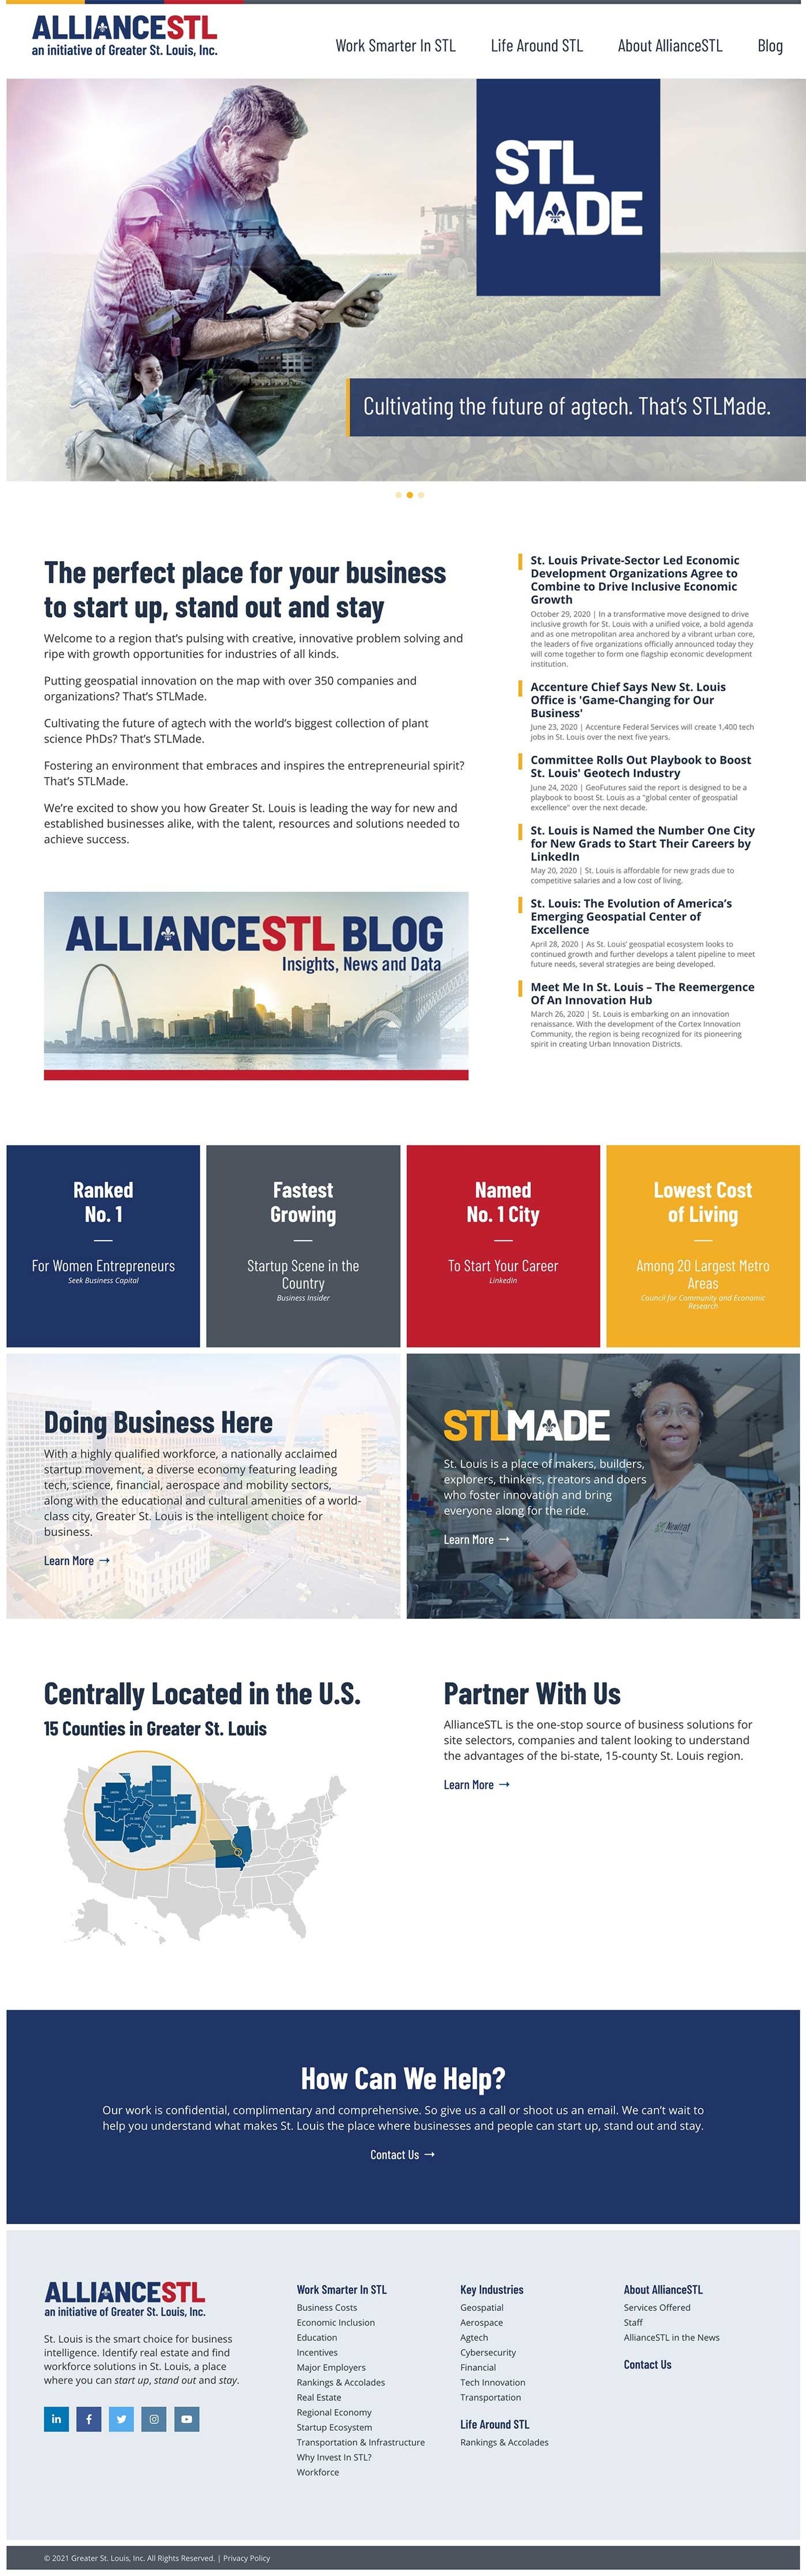 Screenshot of a webpage: at the top is a banner that reads "ALLIANCESTL" (smaller text reads, "an initiative of Greater St. Louis, Inc.) — "ALLIANCE" in dark blue and "STL" in red; the four navigation tabs are "Work Smarter in STL", "Life Around STL", "About AllianceSTL", and "Blog". Below the upper tab is an image of a person kneeling, holding a tablet against a faded background of farmland; on this photo are the banners "STL MADE" (the fleur de lis adorning the A) and "Cultivating the future of agtech. That's STLMade.". The text on the site provides more information on St. Louis, business information, and contact information.